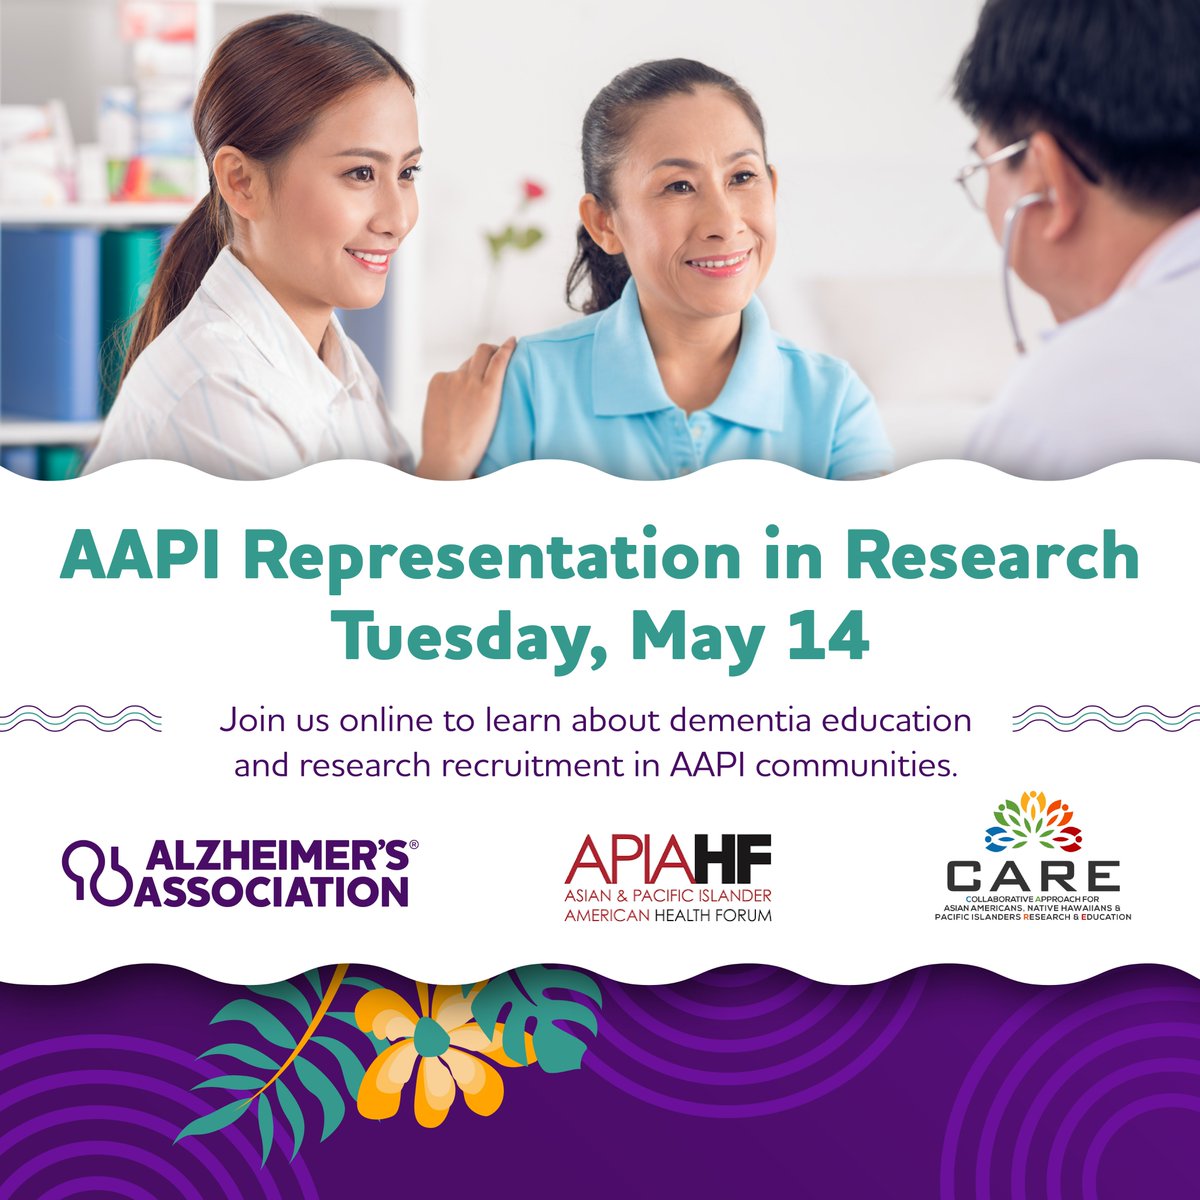 Asian Americans are the fastest growing major racial group in the U.S., but they're among the least represented in scientific research. Join us online on May 14 at 1 p.m. CT to learn what’s being done to educate AAPI communities about dementia and how we’re advancing research